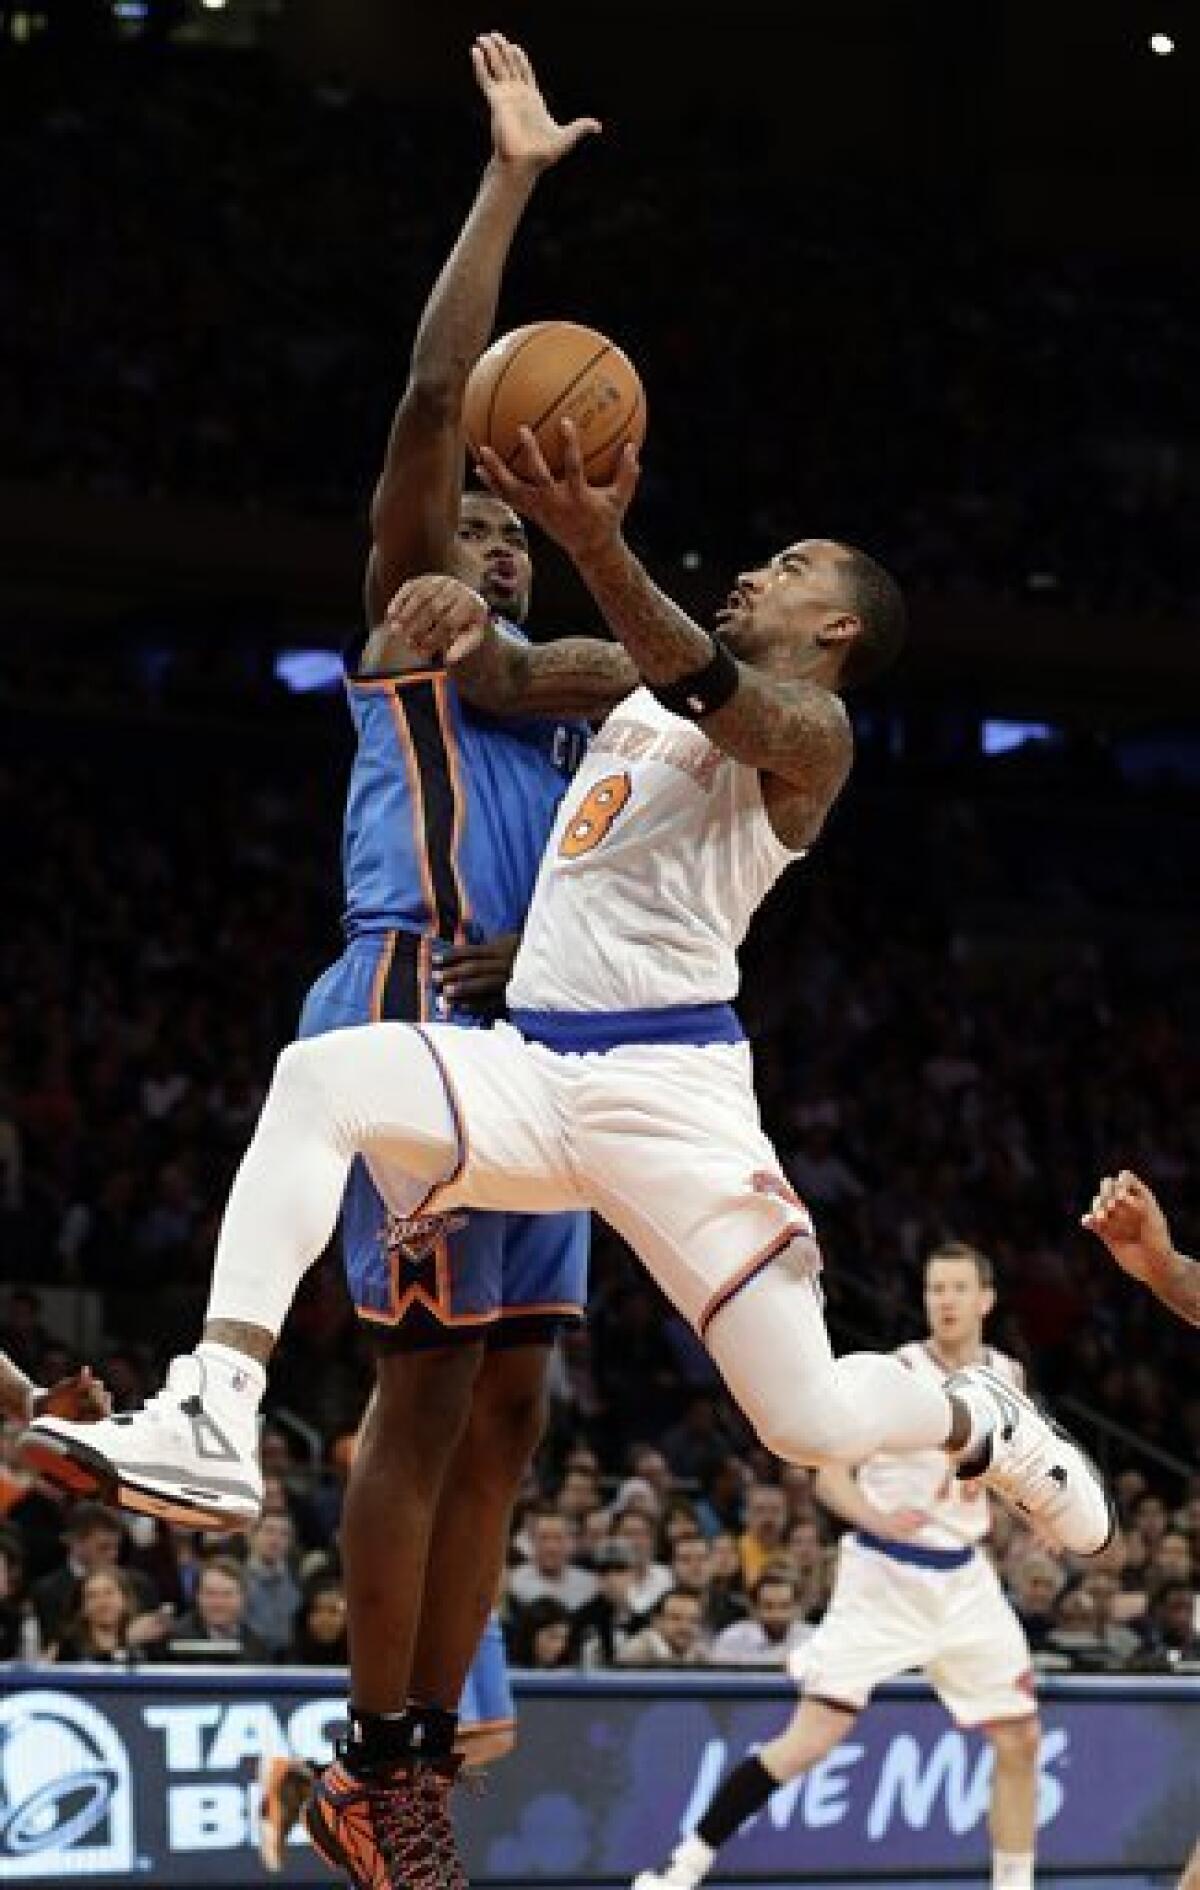 New York Knicks J.R. Smith reacts after making a basket in the